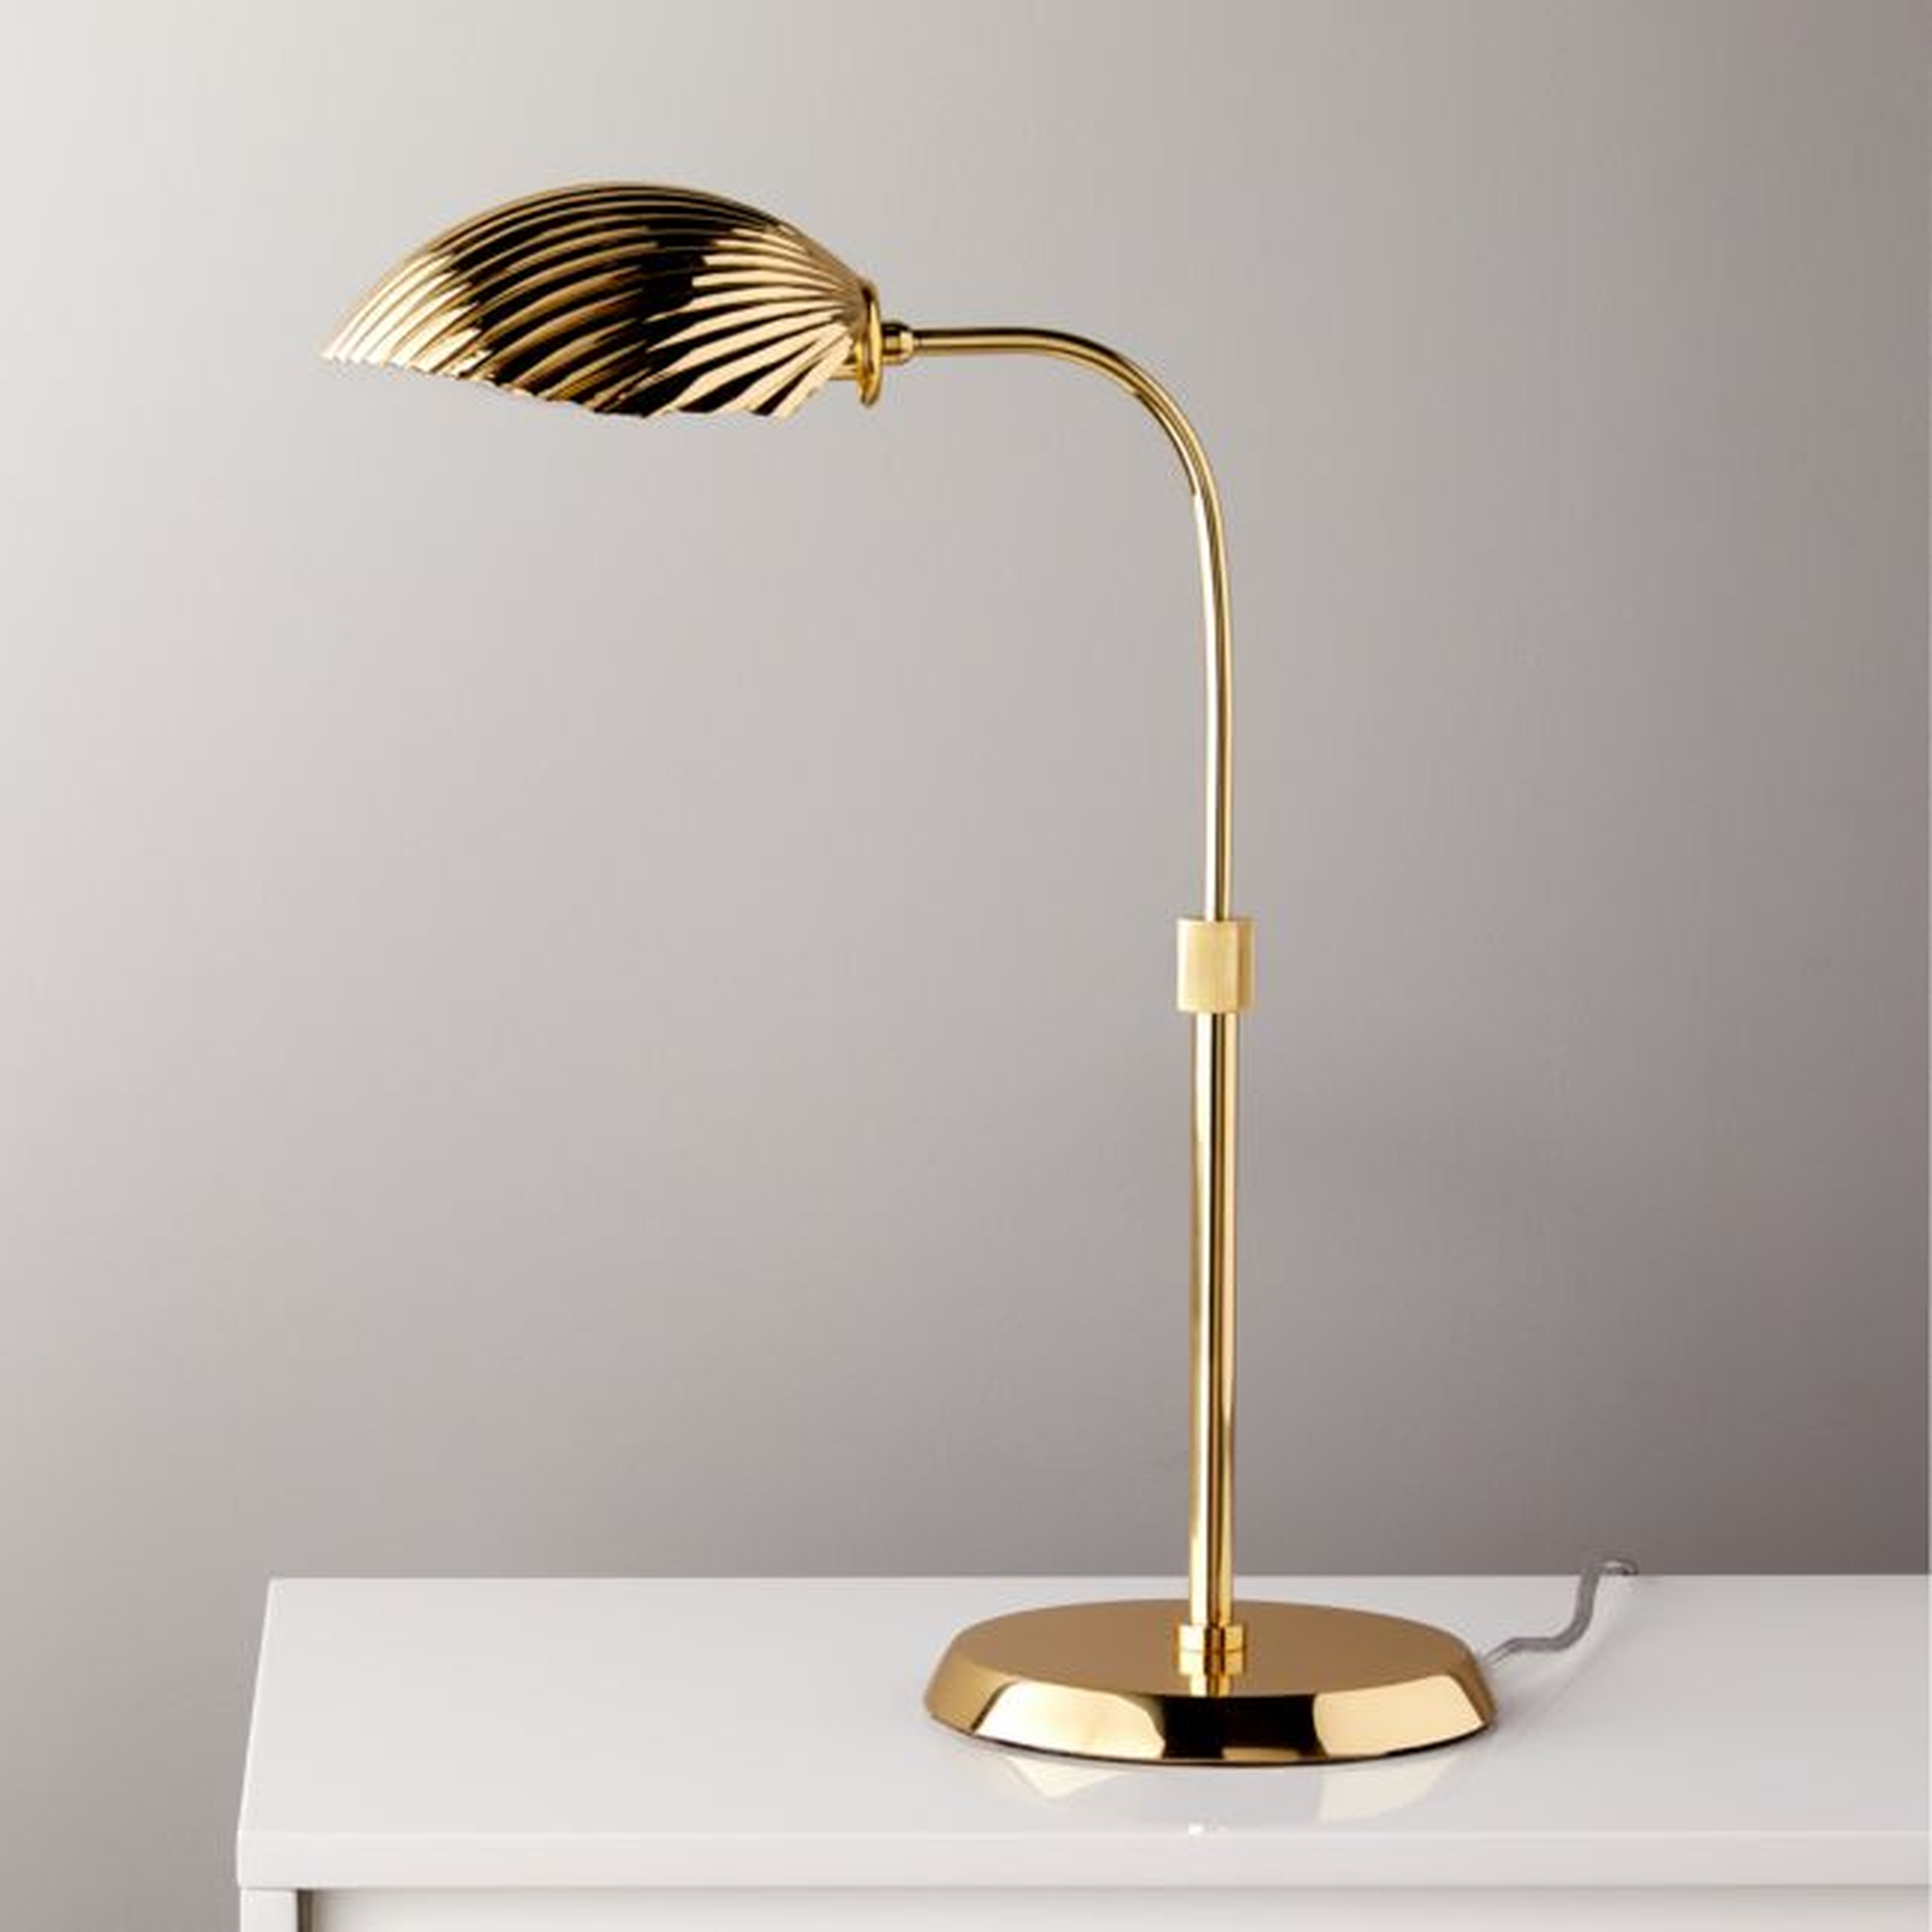 Crinkle Polished Brass Table Lamp - CB2